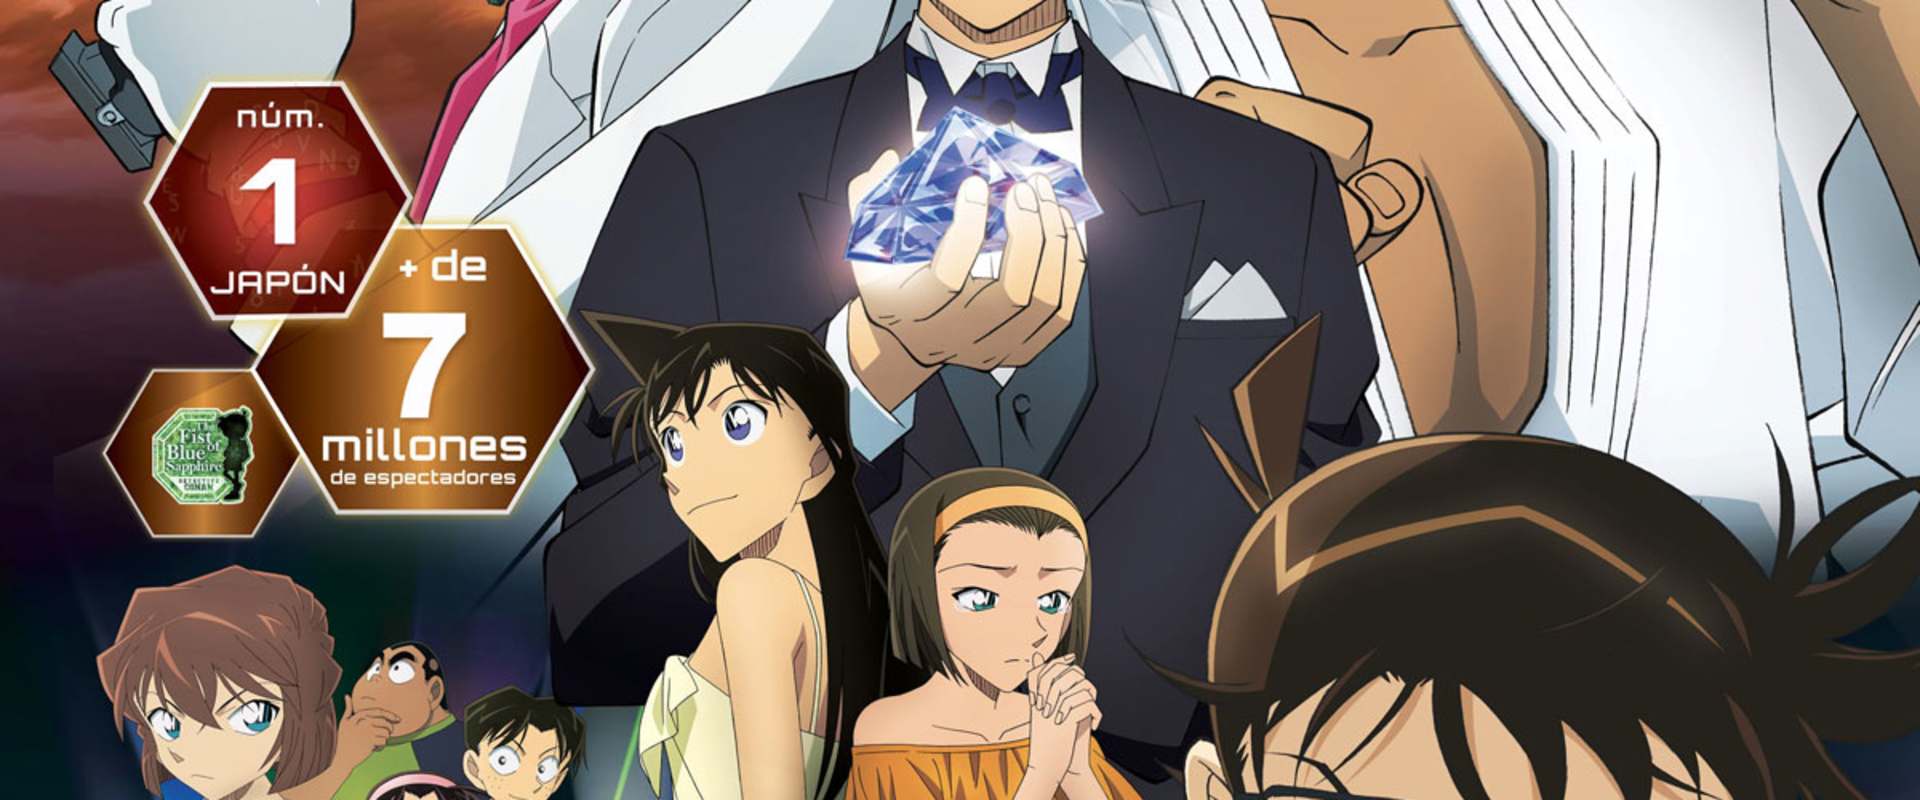 Detective Conan: The Fist of Blue Sapphire background 1